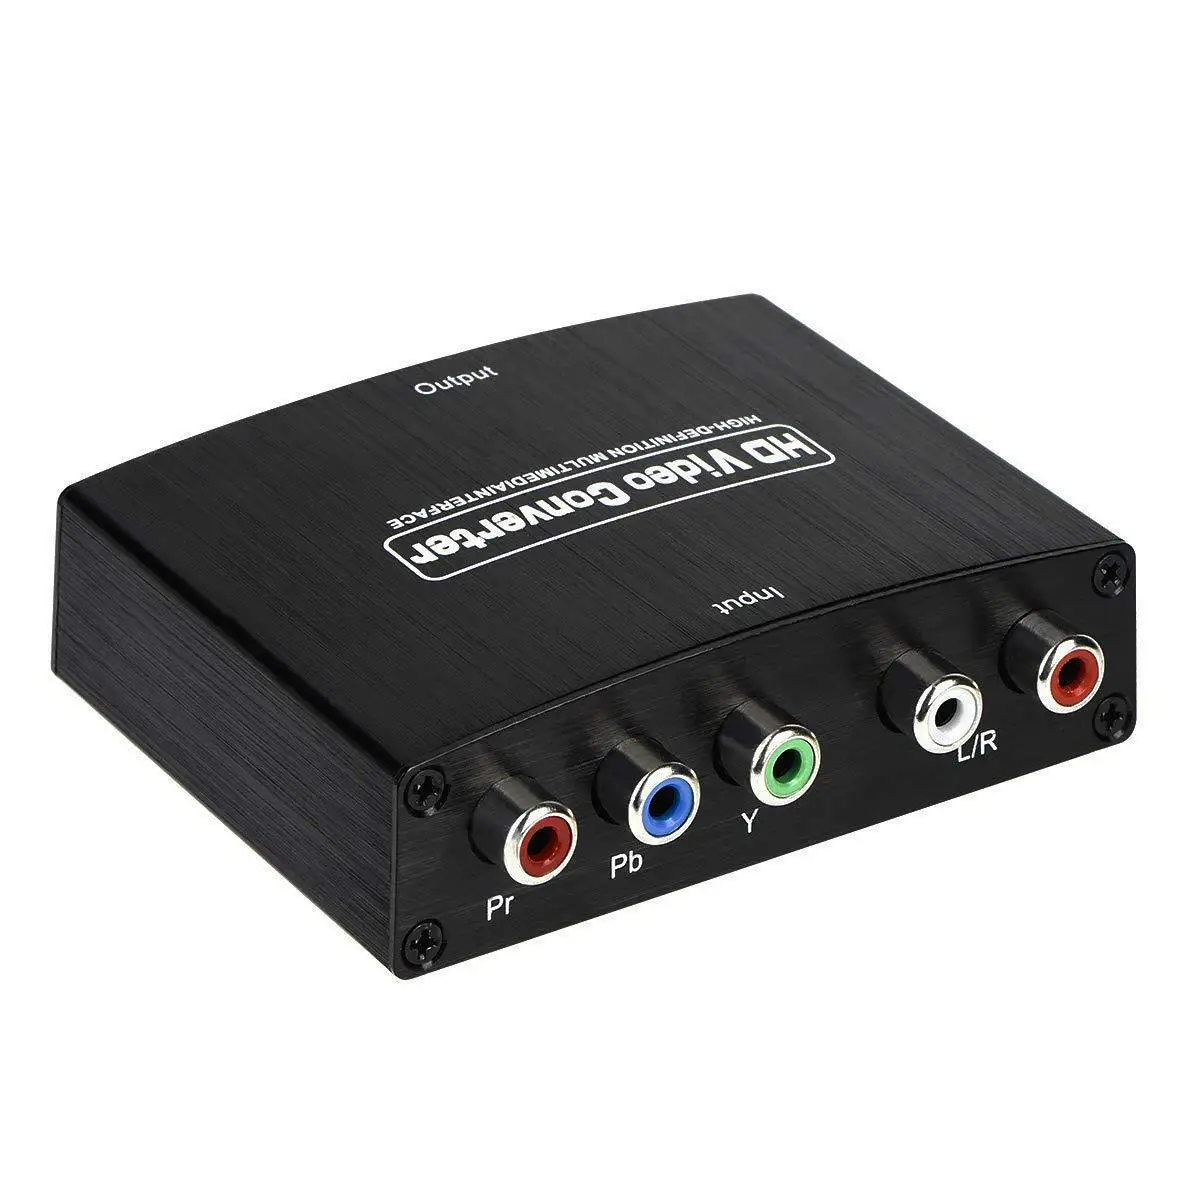 YPBPR to HDMI 1080P to RGB Component Video R/L Audio Adapter Converter DE 